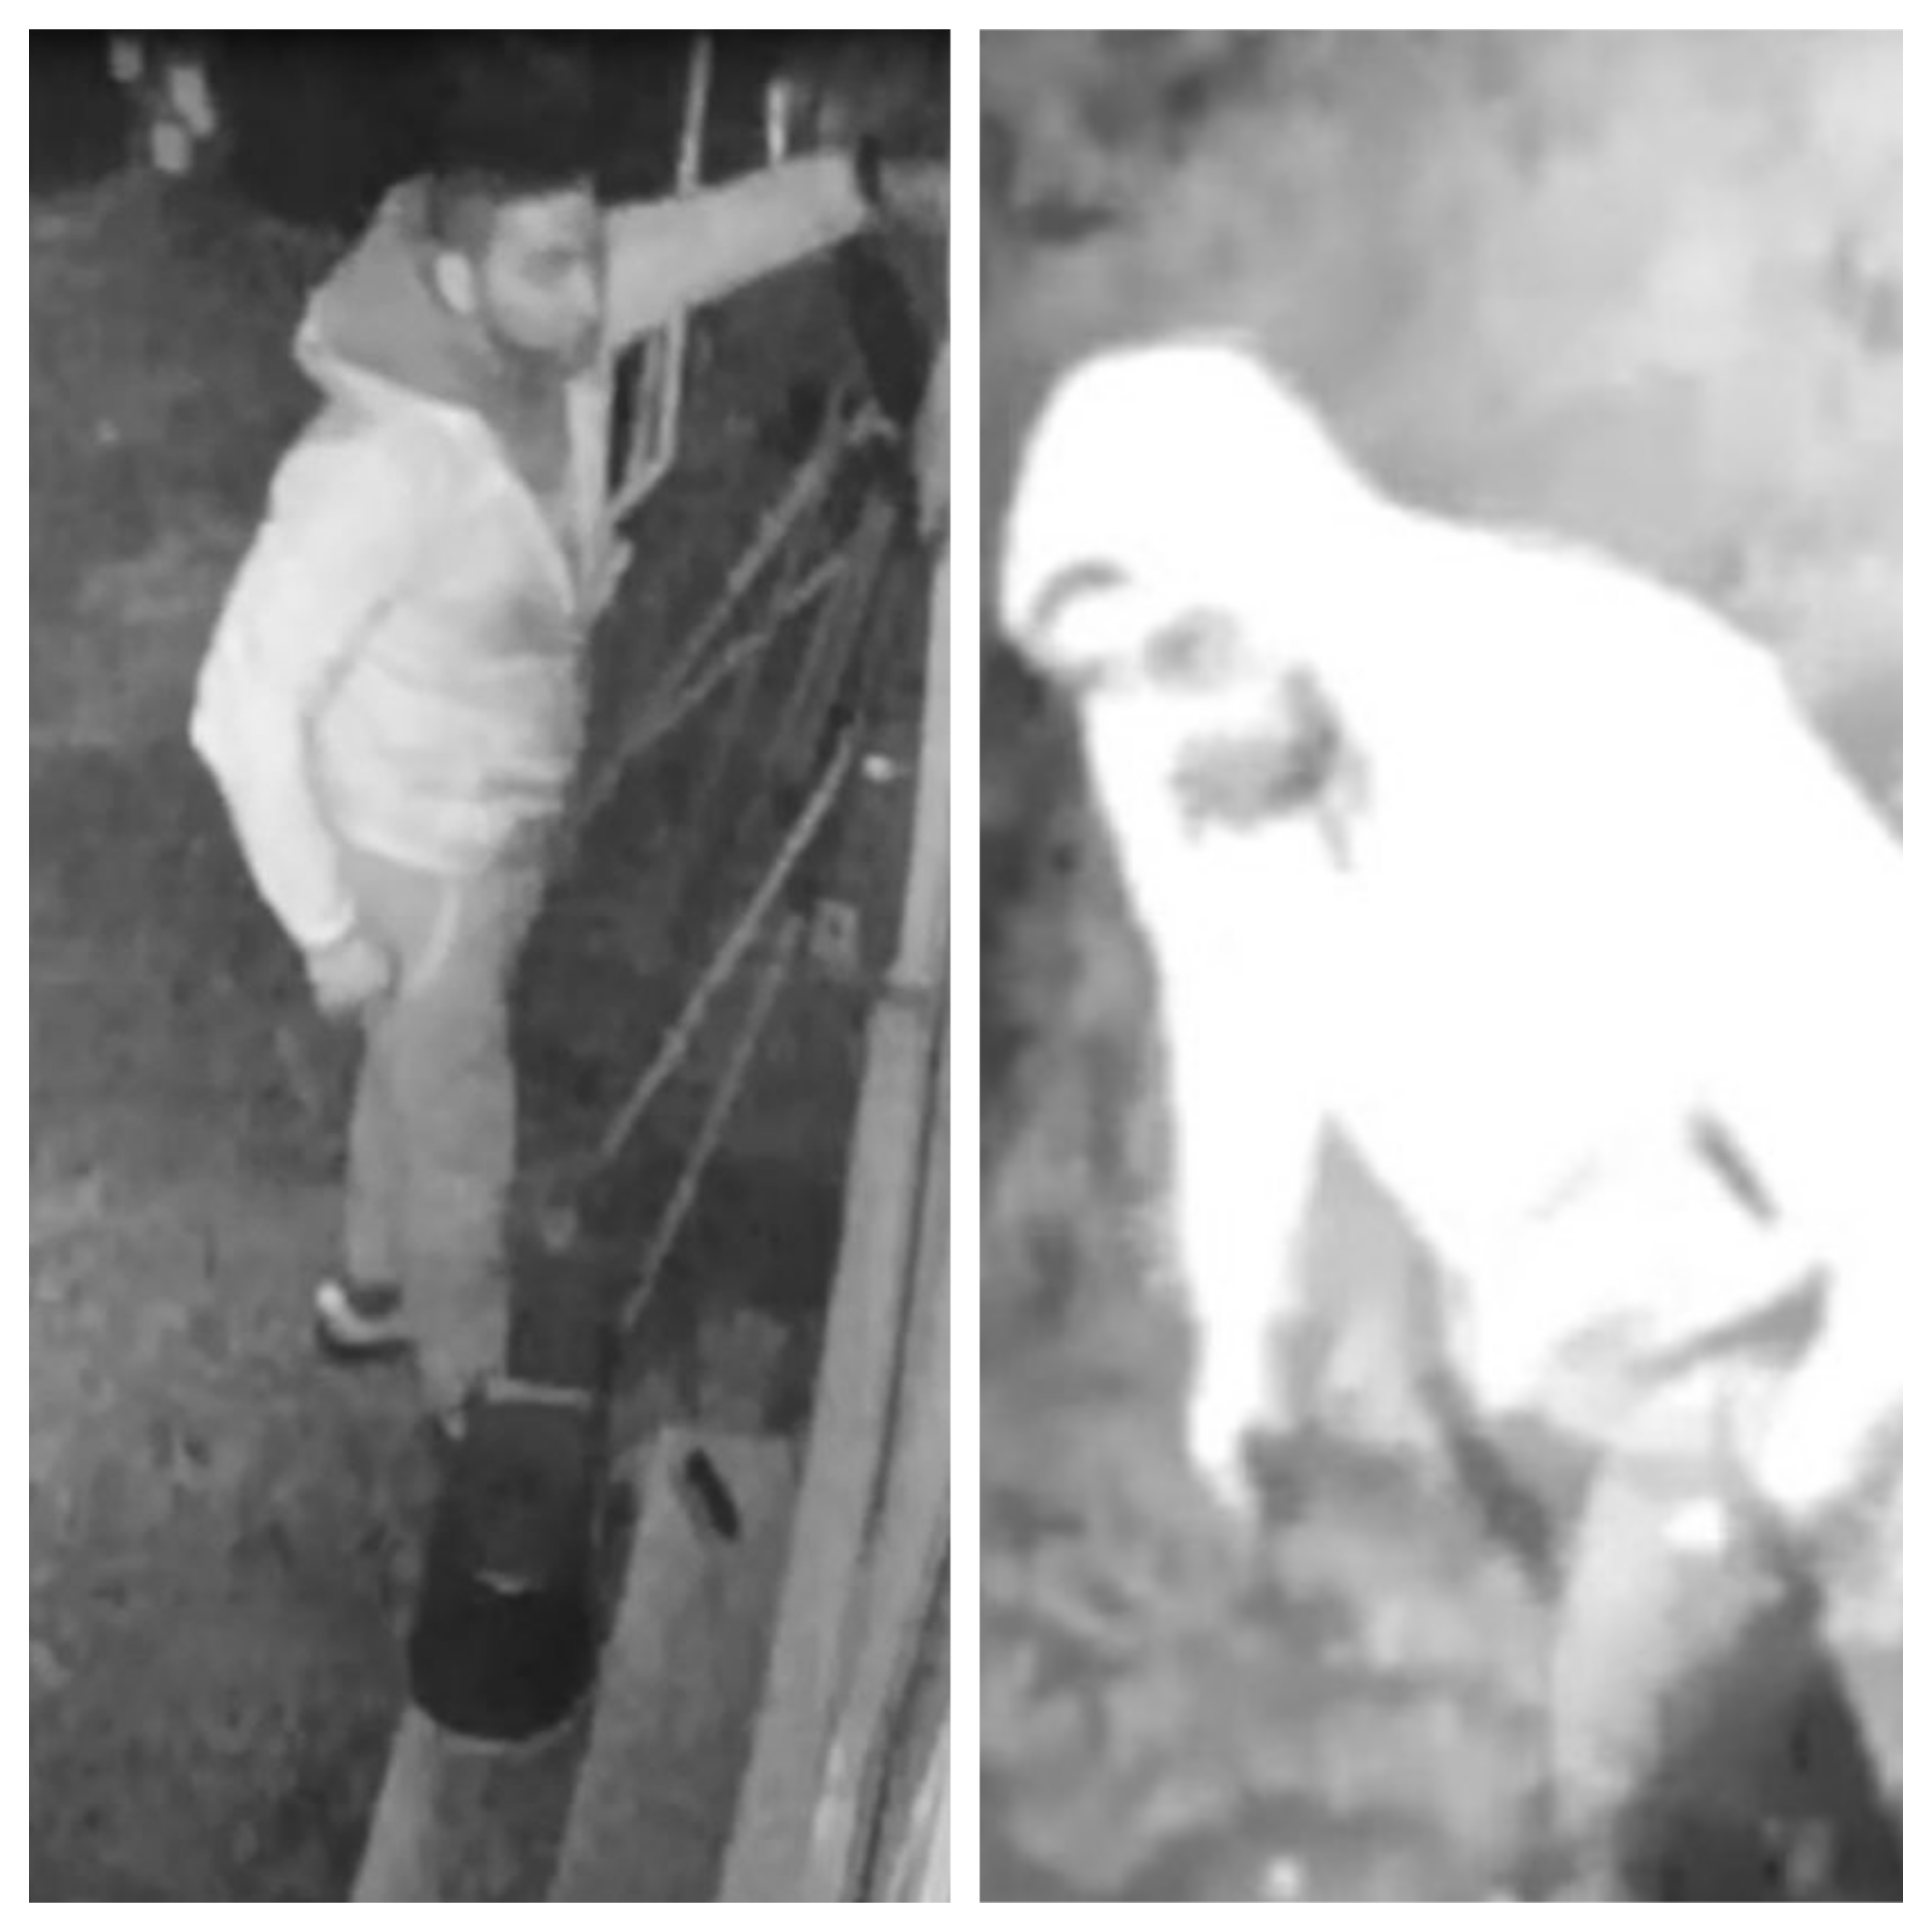 CCTV stills of two of the suspects